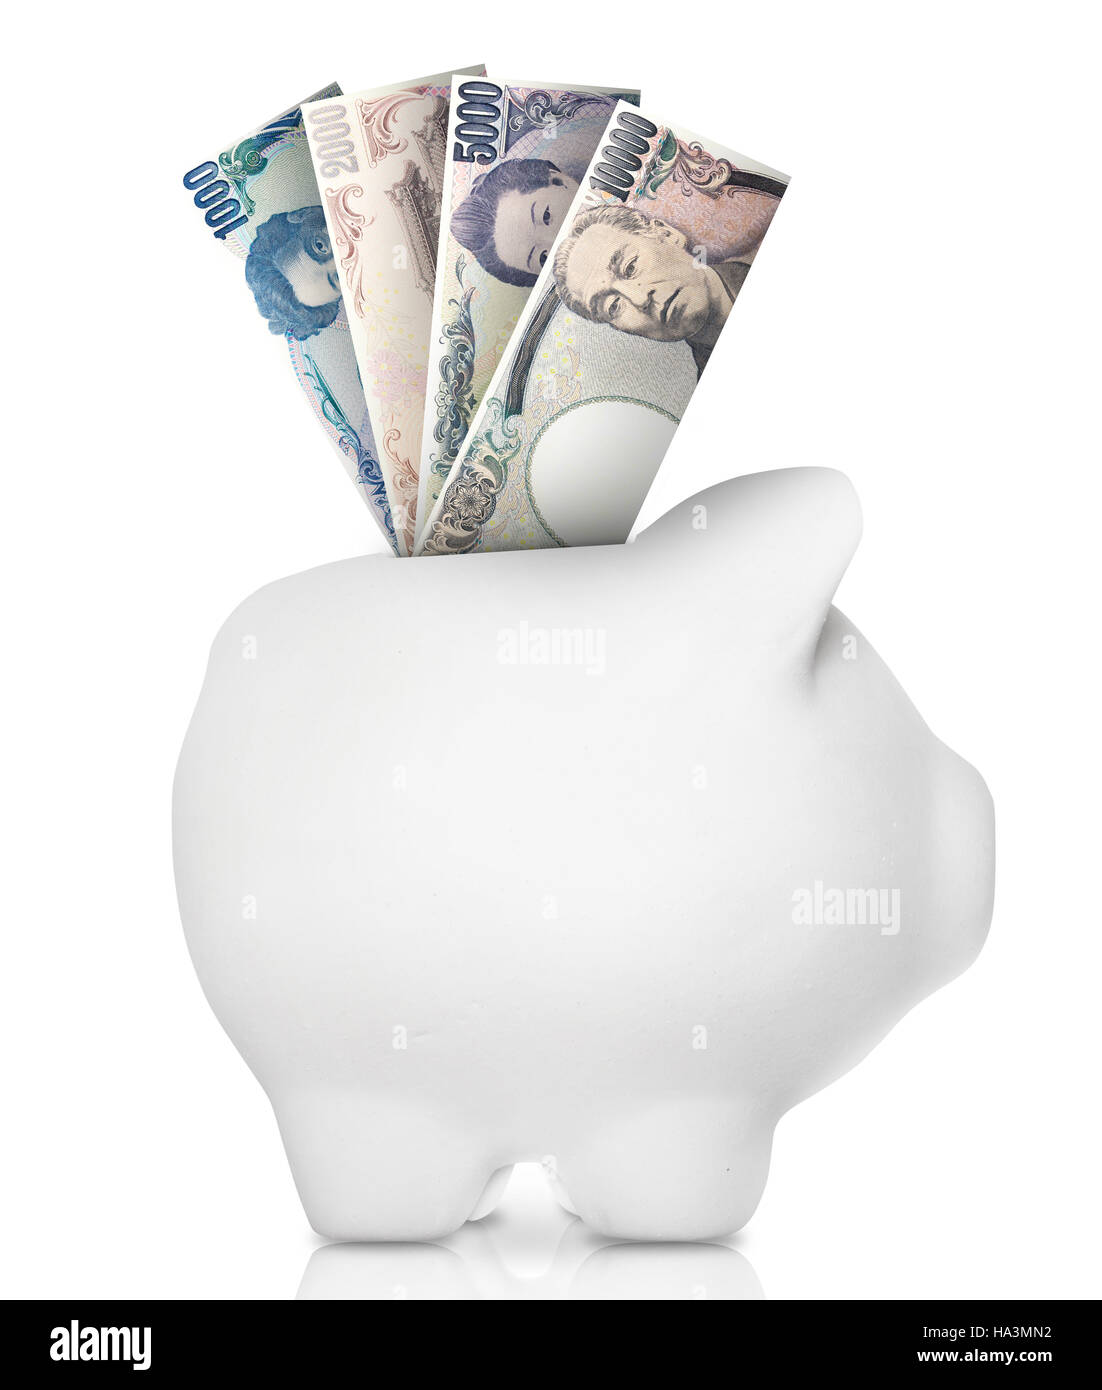 A white piggy bank filled with multiple bank notes. Stock Photo